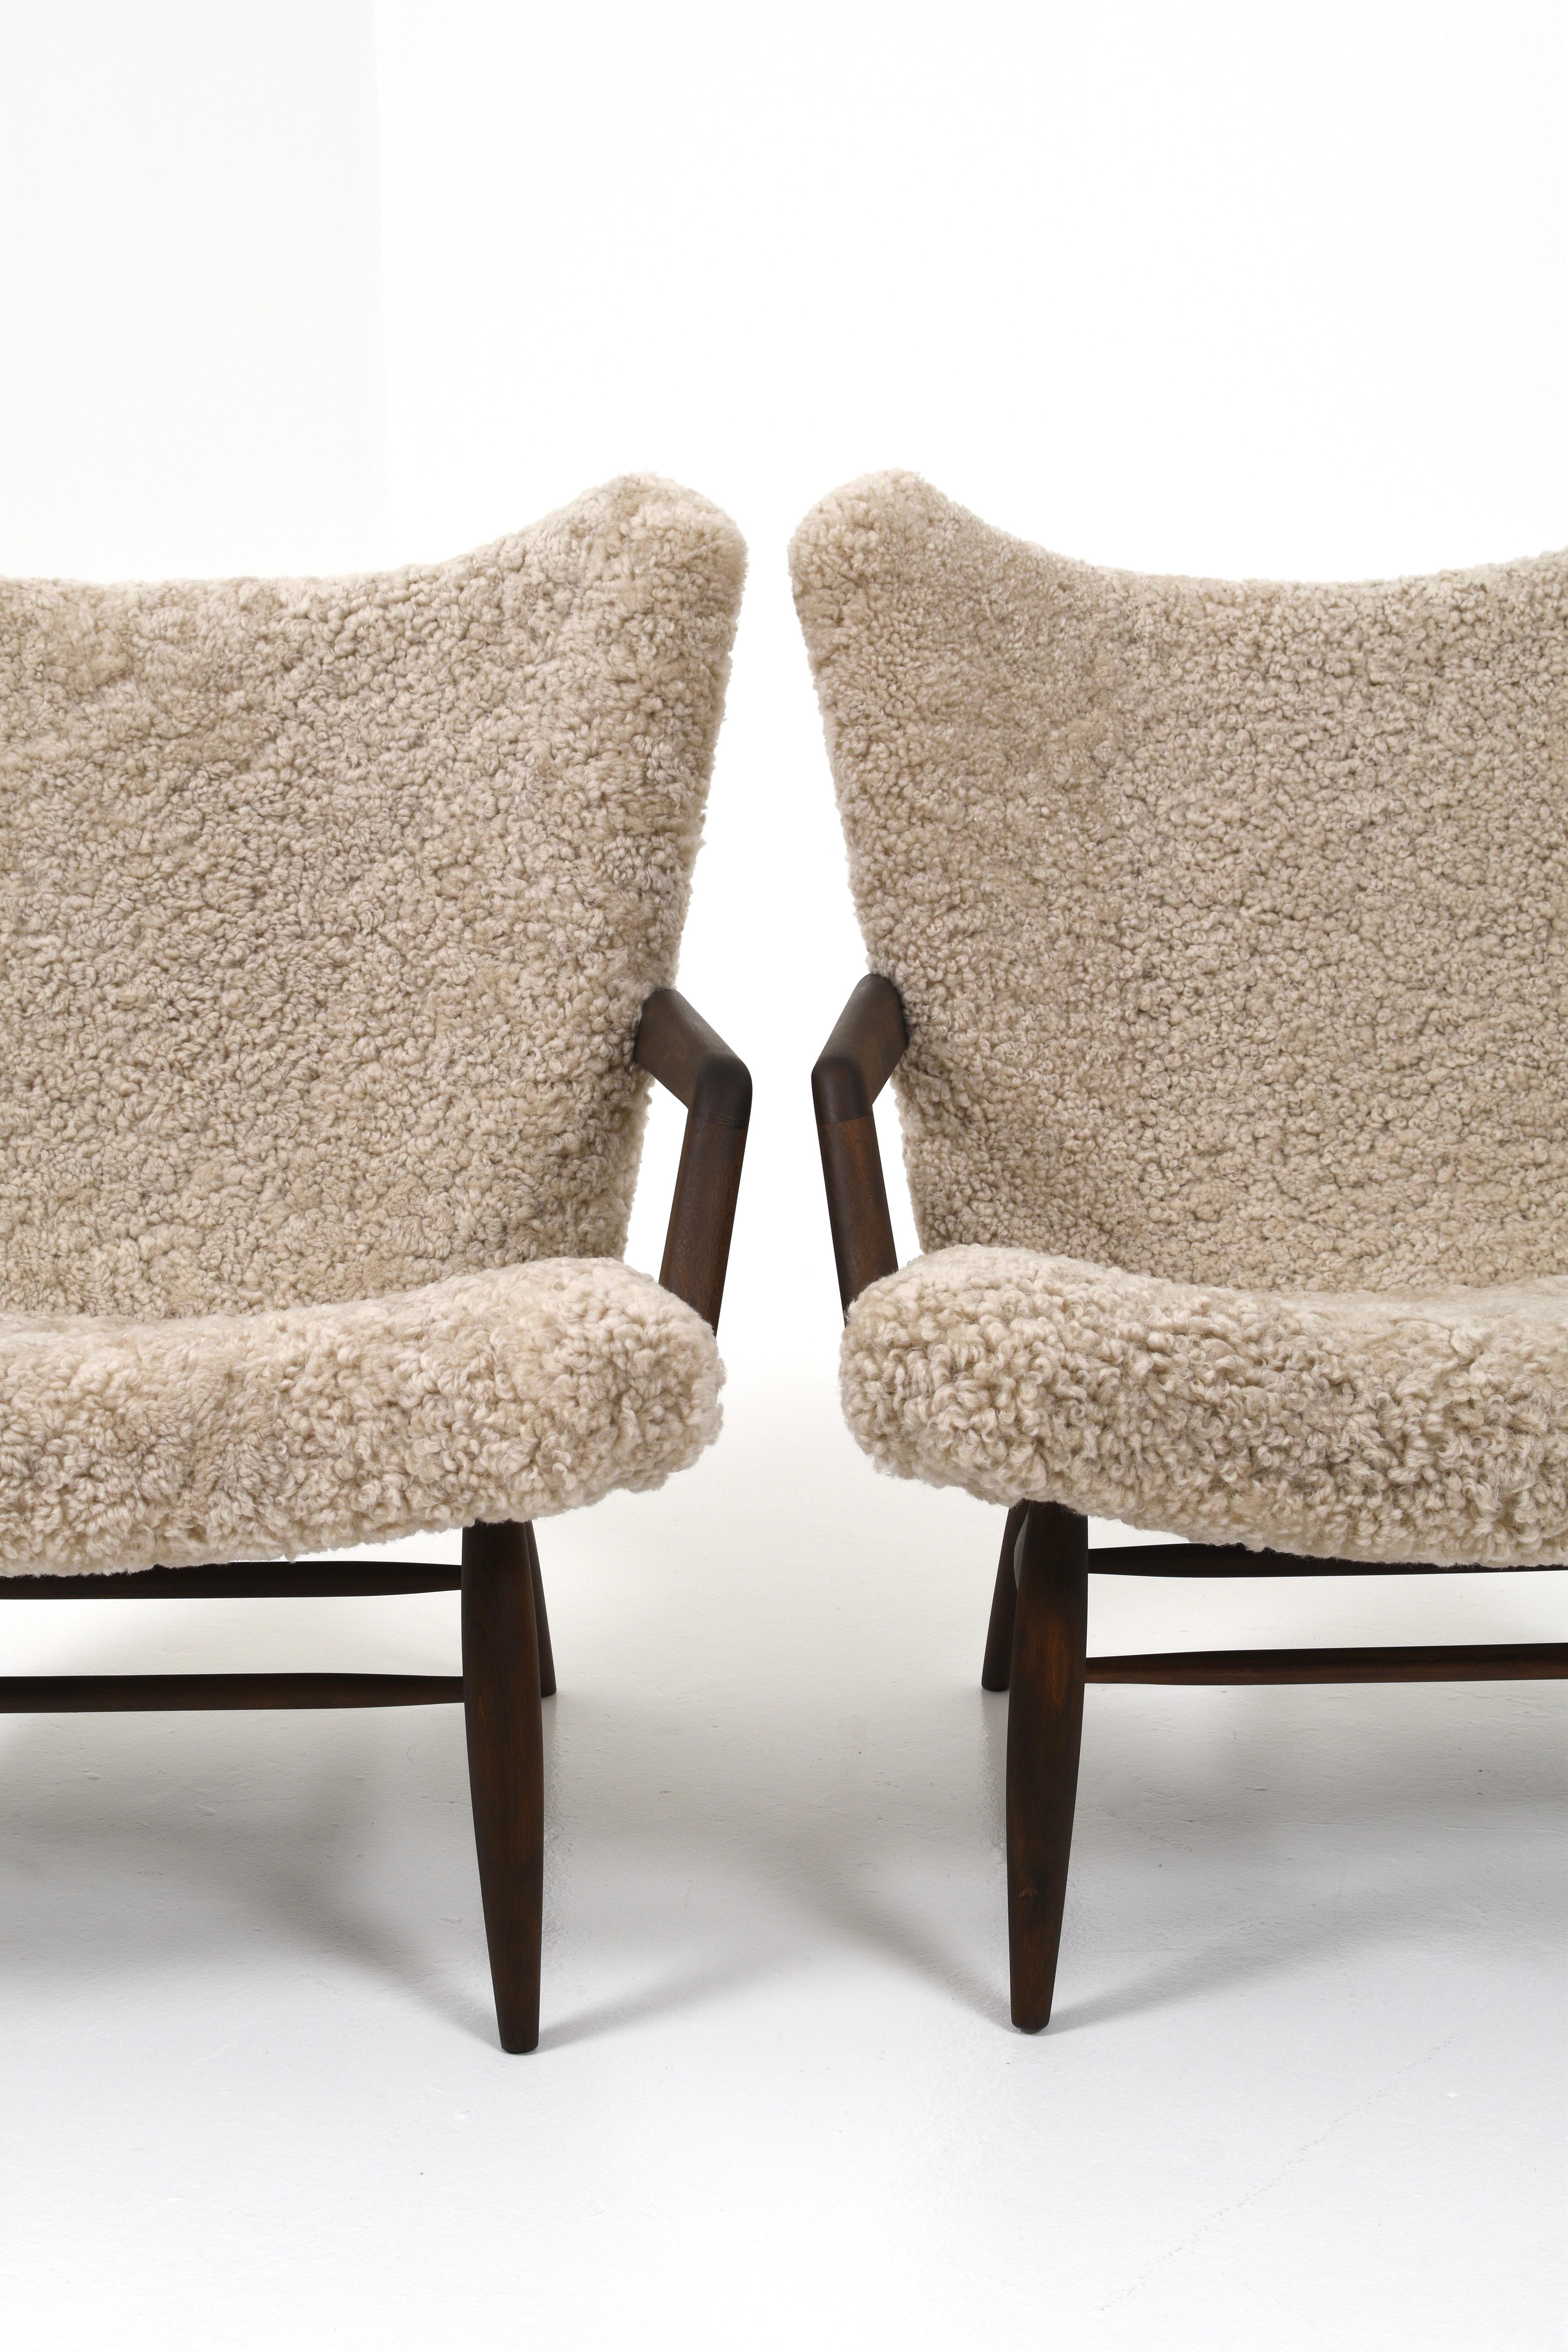 Mid-20th Century Pair of armchairs in Sheepskin by Svante Skogh, 1950s For Sale